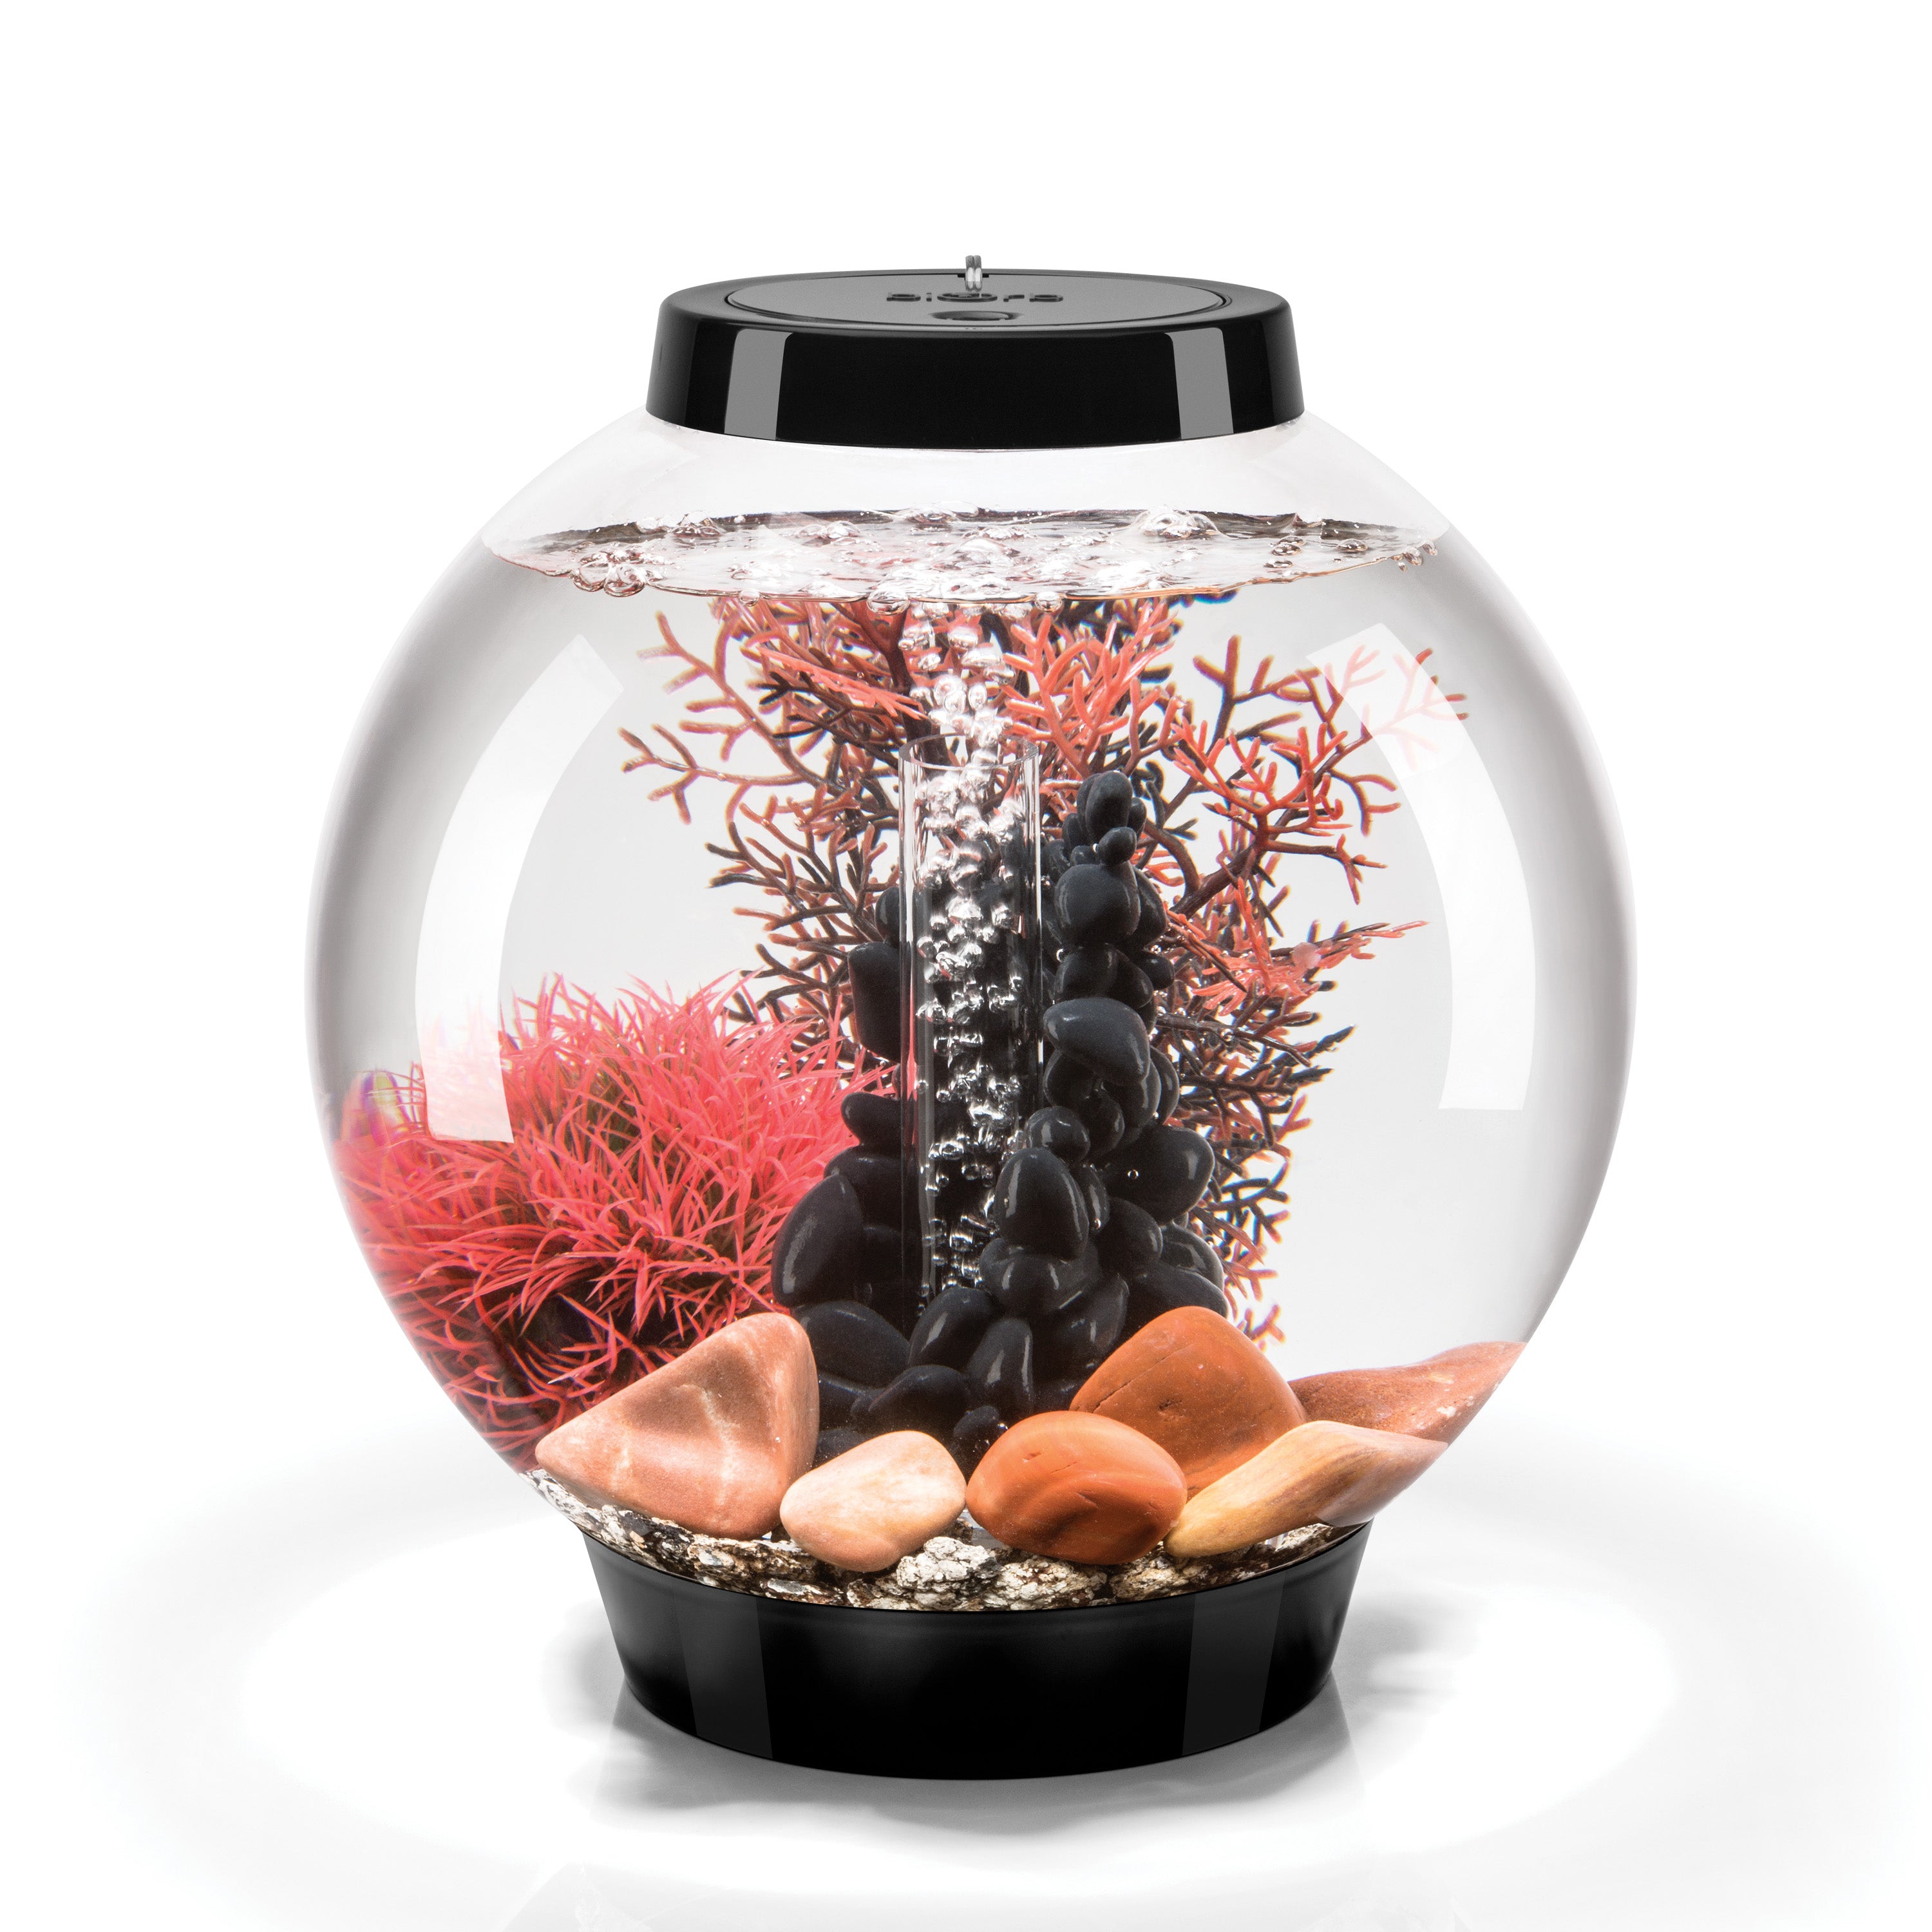 Biorb Classic Aquarium With All Decor And Accessories Included - White Led Light-decoration peice-AULEY